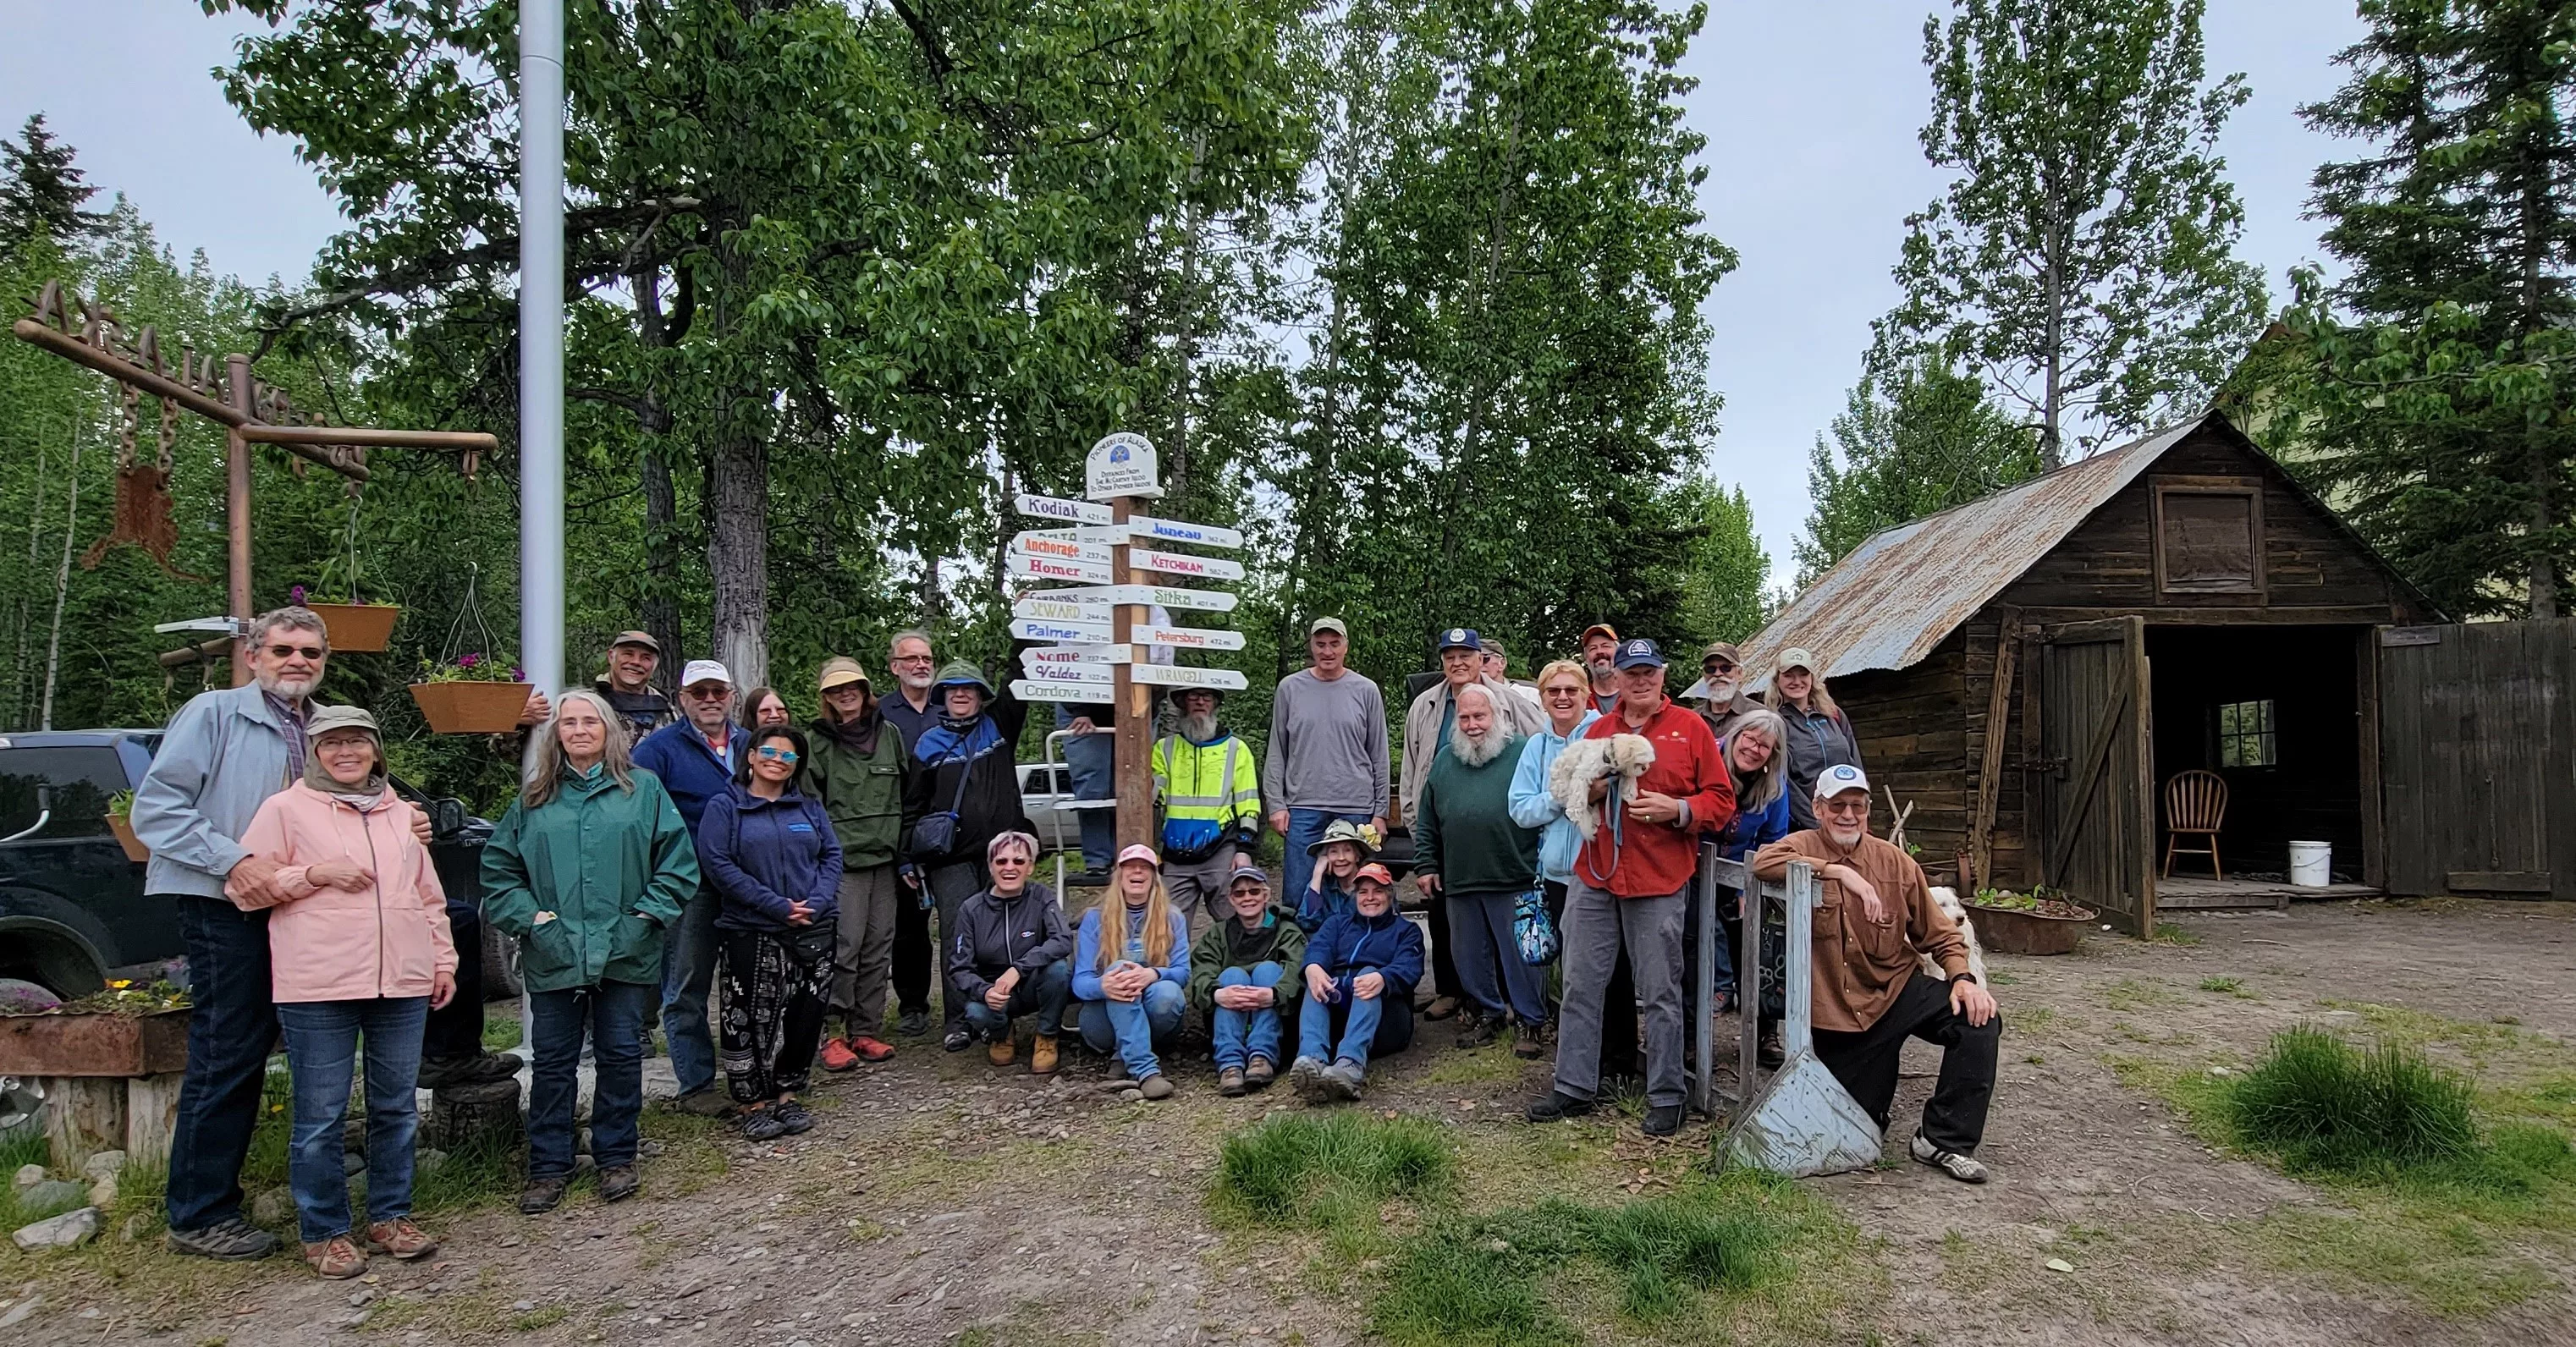 Pioneers-of-Alaska-pose-with-the-new-signpost-they-erected-designating-distances-from-McCarthy-Alaska-to-other-Pioneer-Igloos-within-the-state.